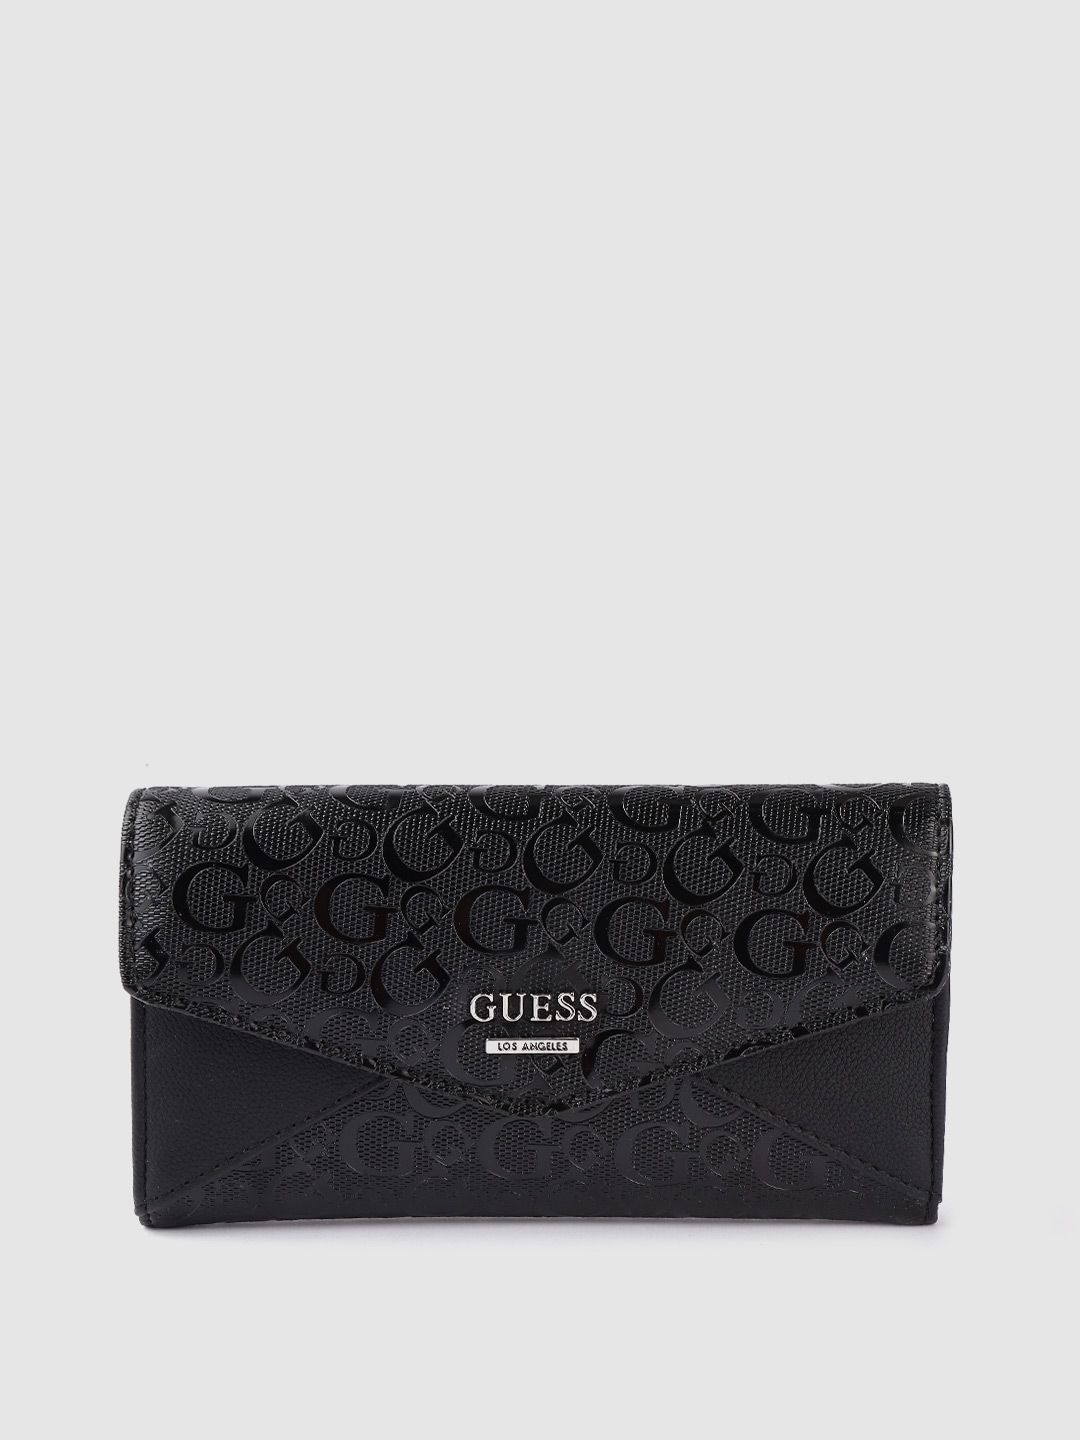 GUESS Women Black Brand Logo Textured PU Three Fold Wallet Price in India